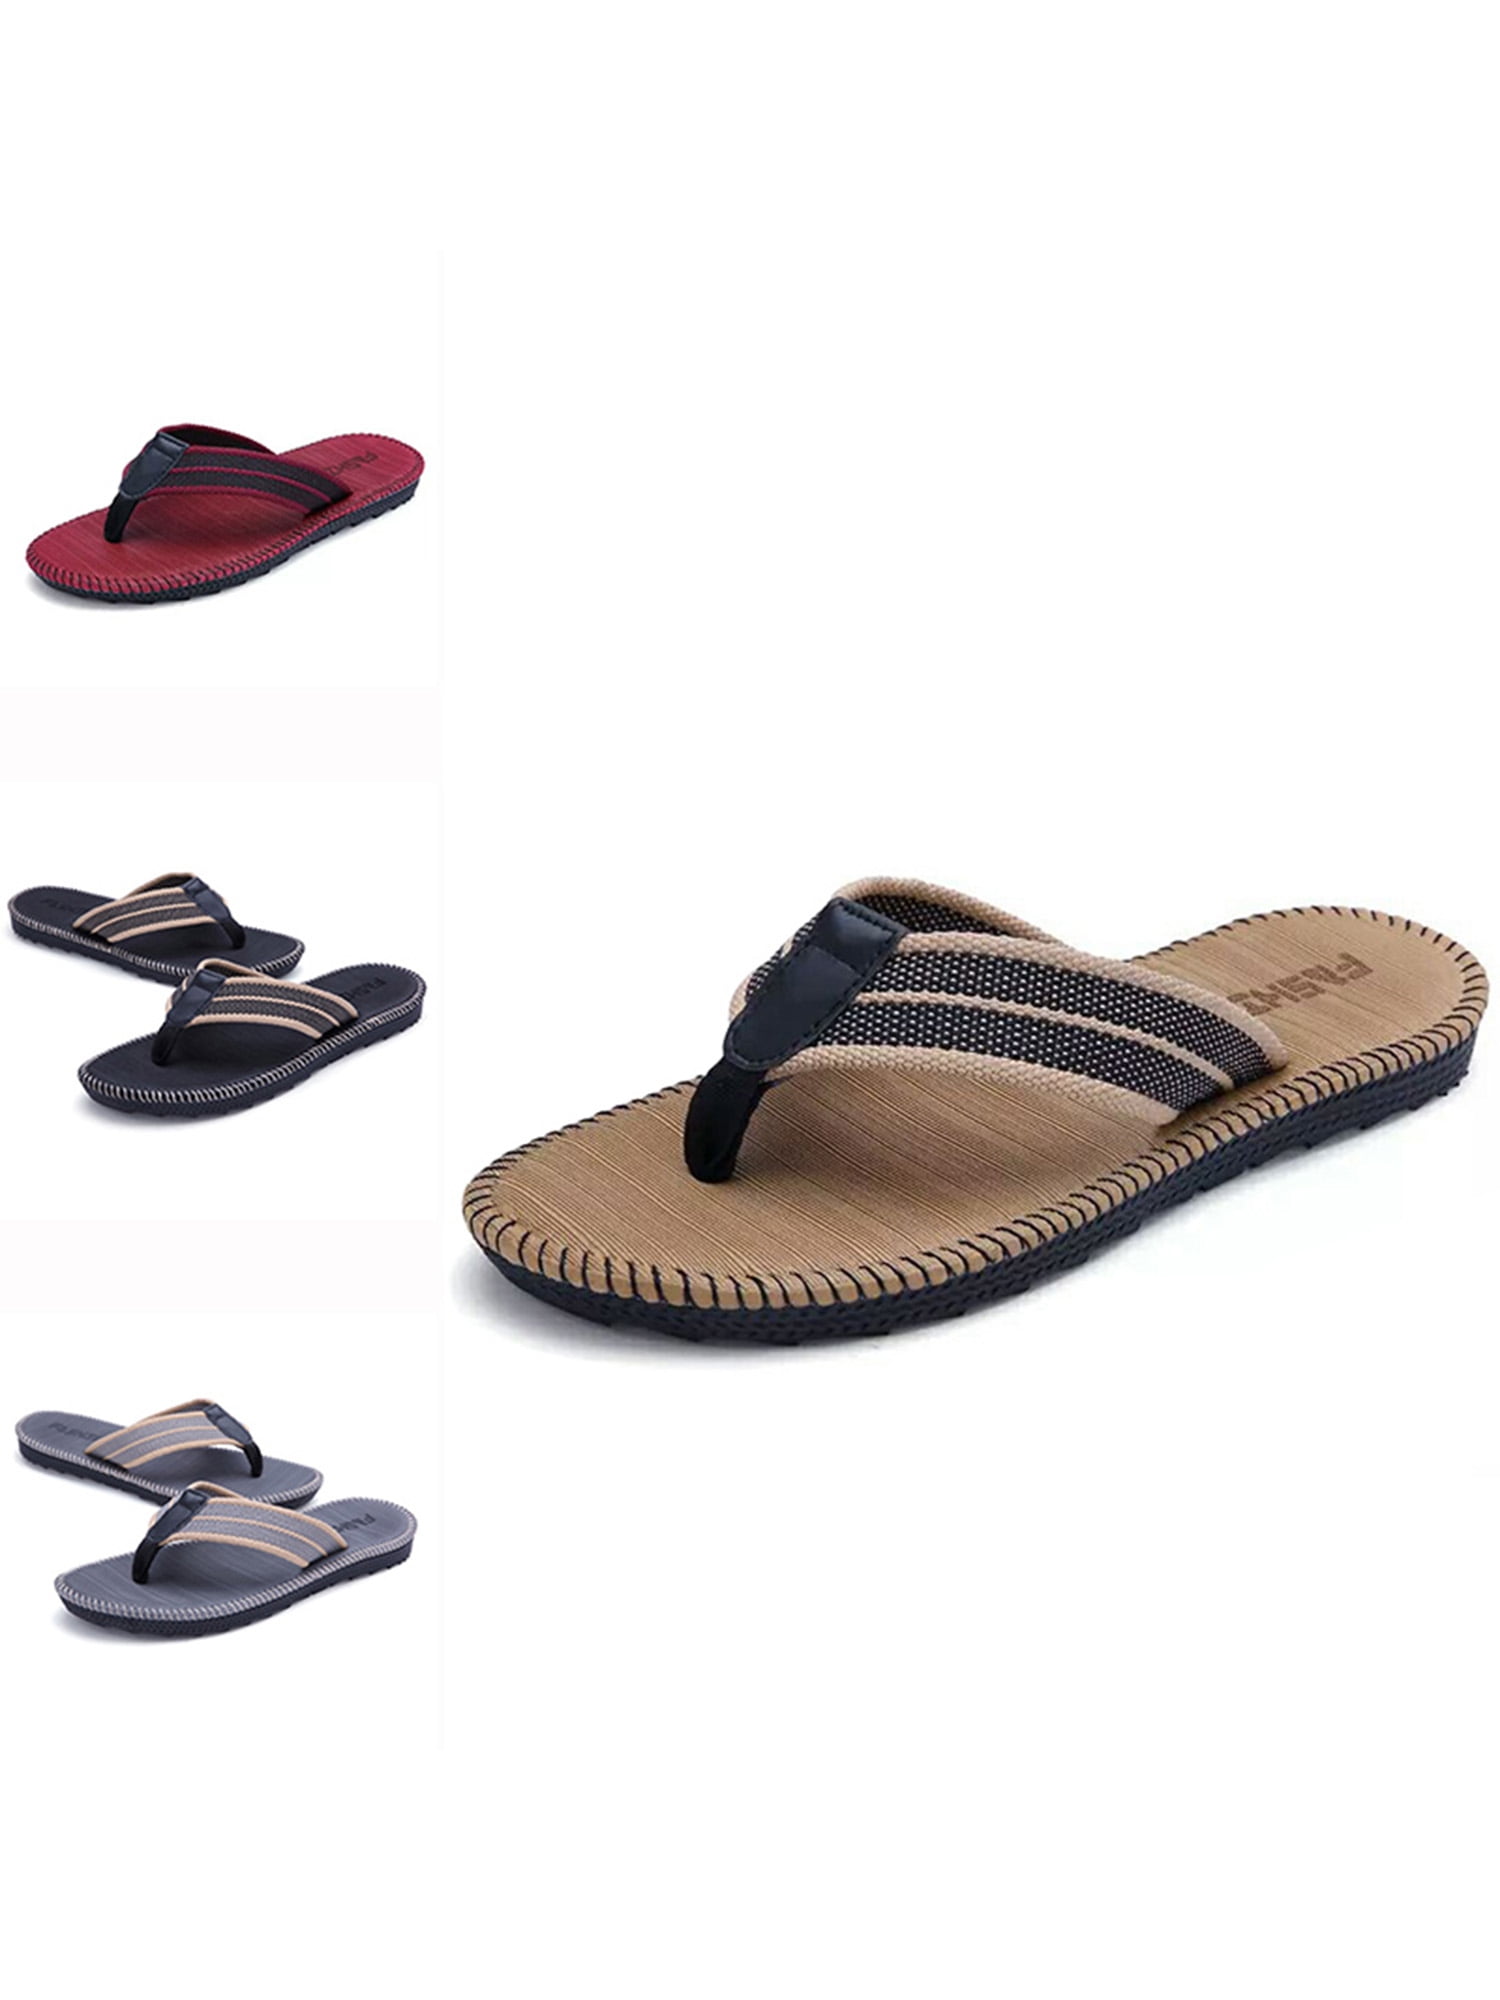 Color : Black, Size Menshoes Slippers for Men Flip-Flops Casual Slip On PU Leather Light Flexible and Simple Slippers Comfortable